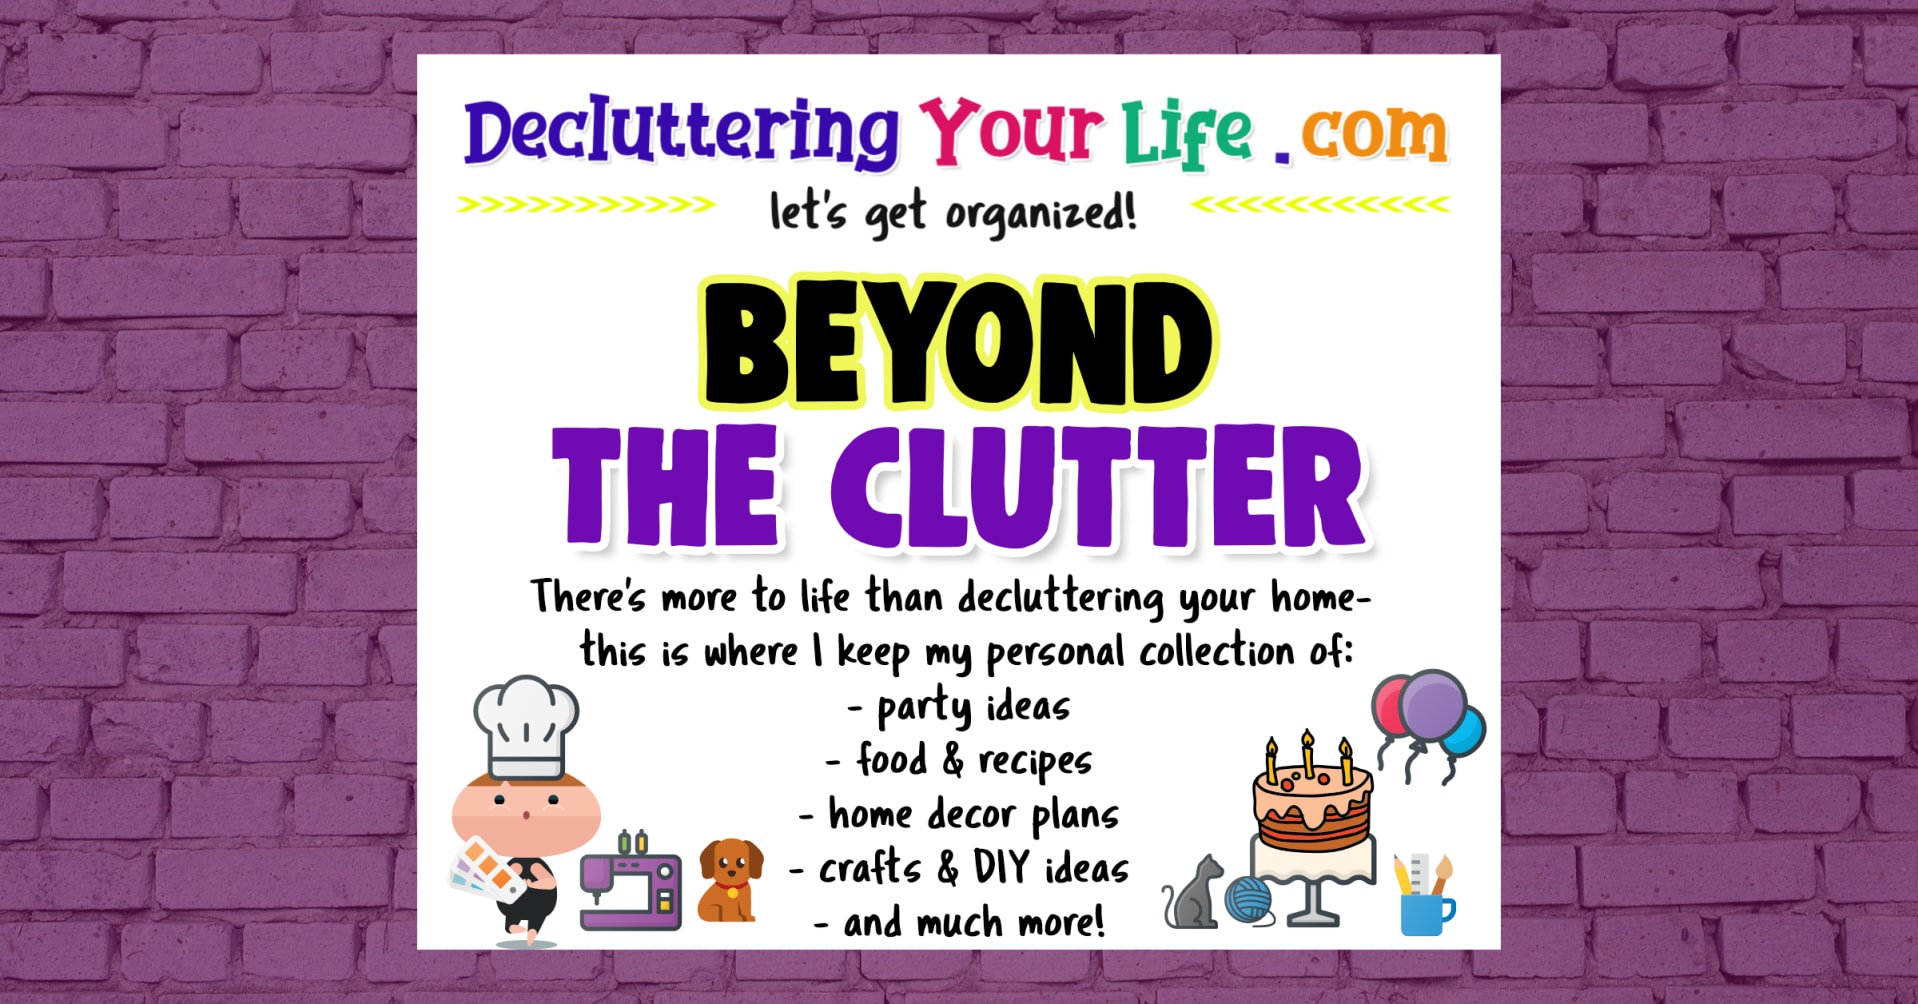 Beyond the CLUTTER - my favorite home decor ideas, gift, food and recipes, party ideas and DIY craft ideas that do NOT have to do with decluttering your home.